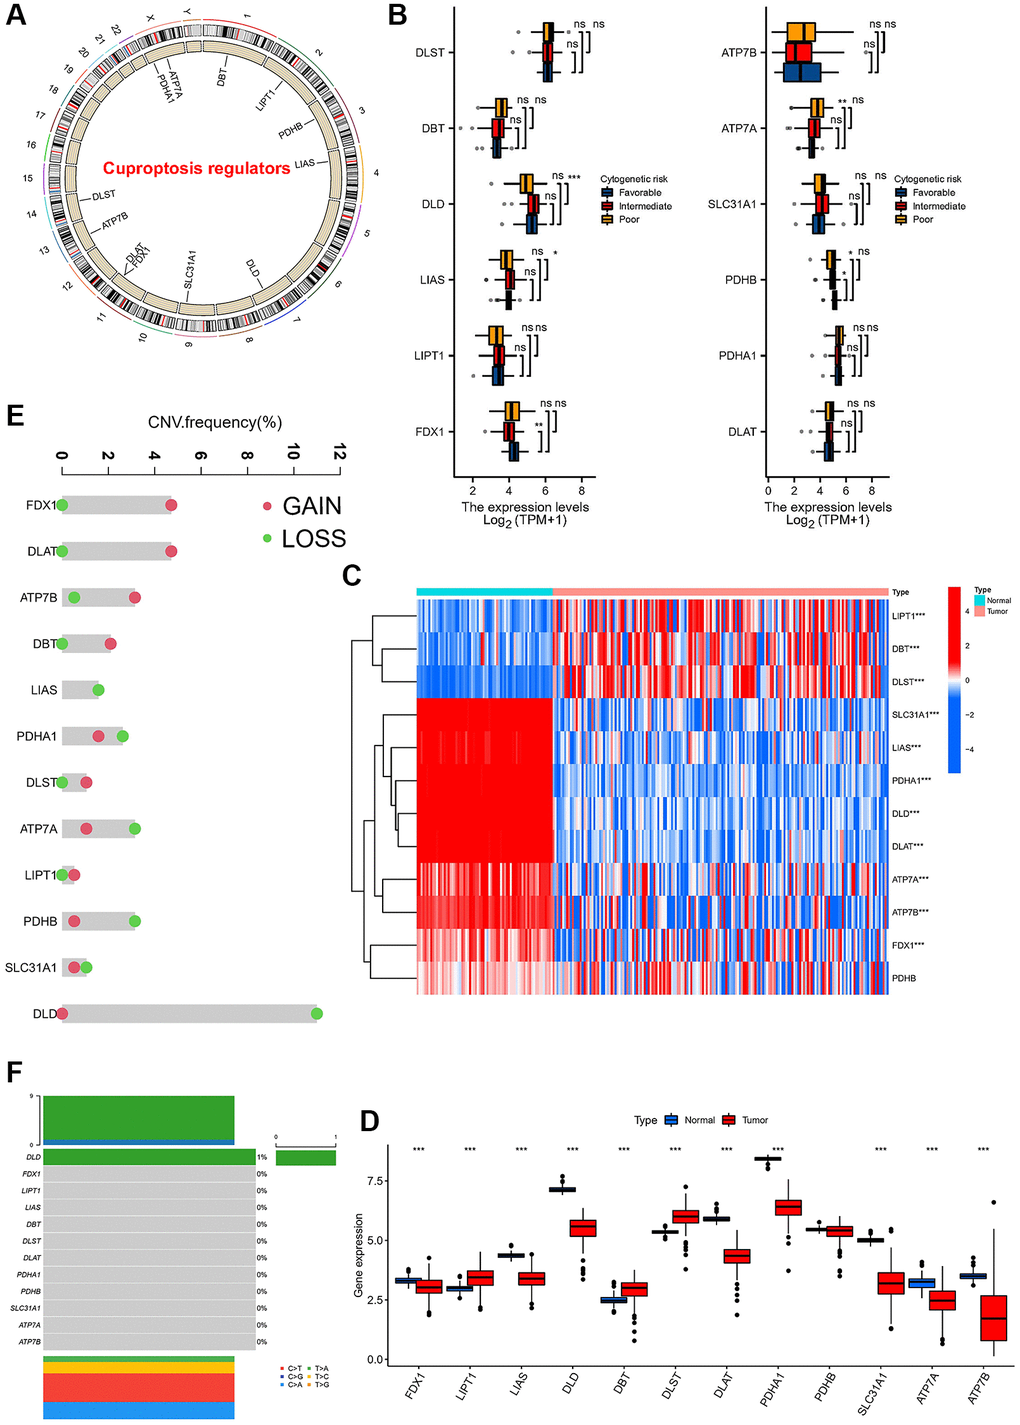 Expression and variation profiles of 12 cuprotosis-related genes in AML patients. (A) Location of CNV of 12 Cuprotosis genes on chromosomes. (B) Expression of 12 cuprotosis-related genes in AML patients with different risk stratification. (C) Heat map of cuprotosis-related genes in AML patients and normal population. (D) Difference in the expression level of cuprotosis-related genes between normal and tumour samples. (E) CNV frequency of Cuprotosis genes, the copy number amplification, green dot; the copy number deletion, red dot. (F) Mutation frequency of 12 cuprotosis-related genes in 130 samples. (*P **P ***P 